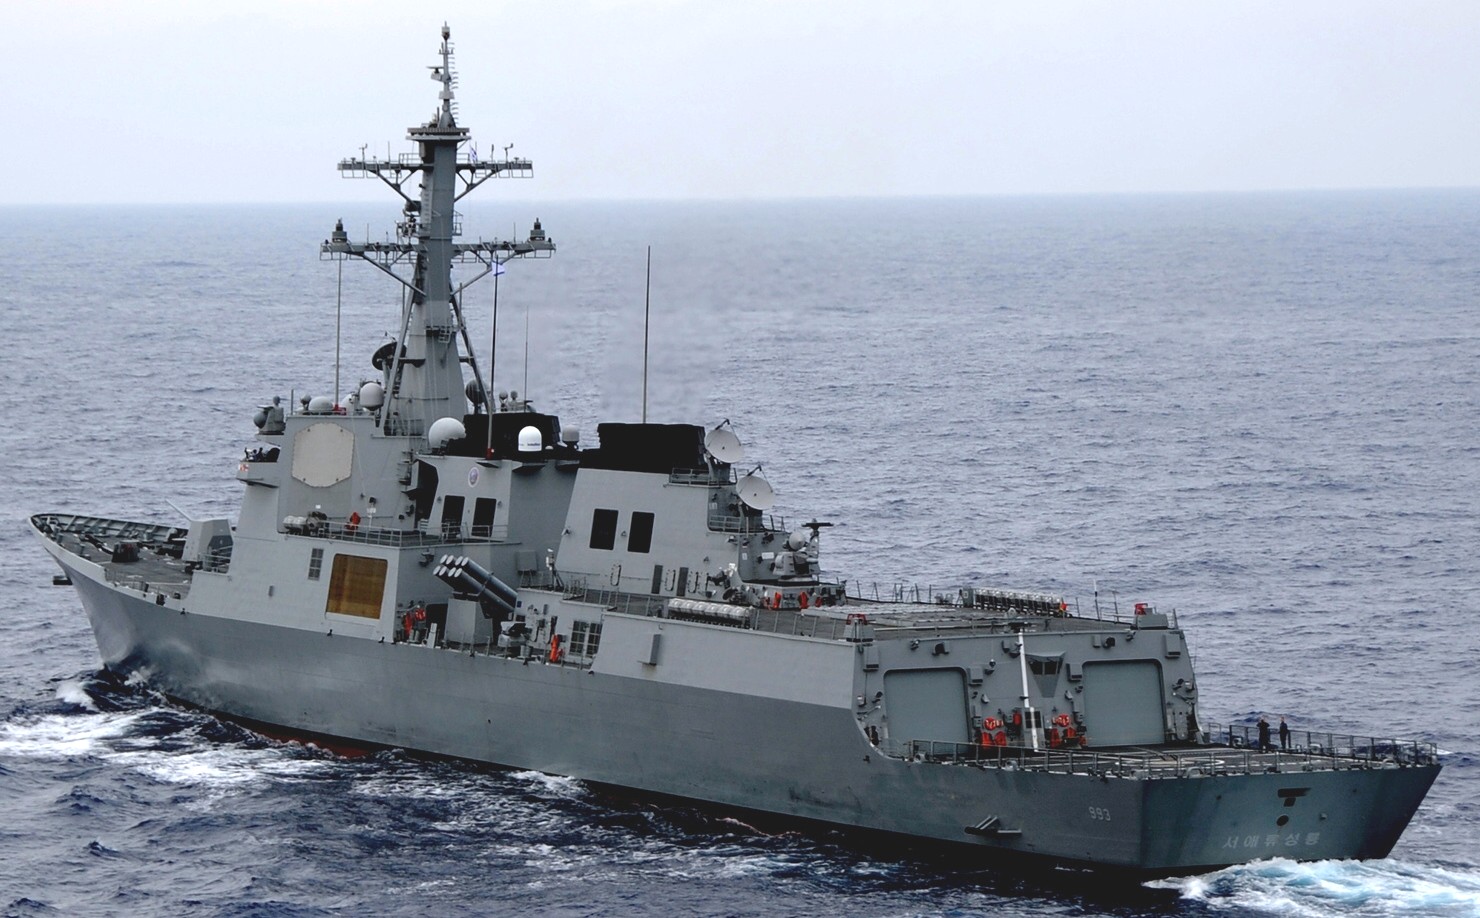 ddg-993 roks seoae ryu seong-ryong sejong the great class guided missile destroyer aegis republic of korea navy rokn 20